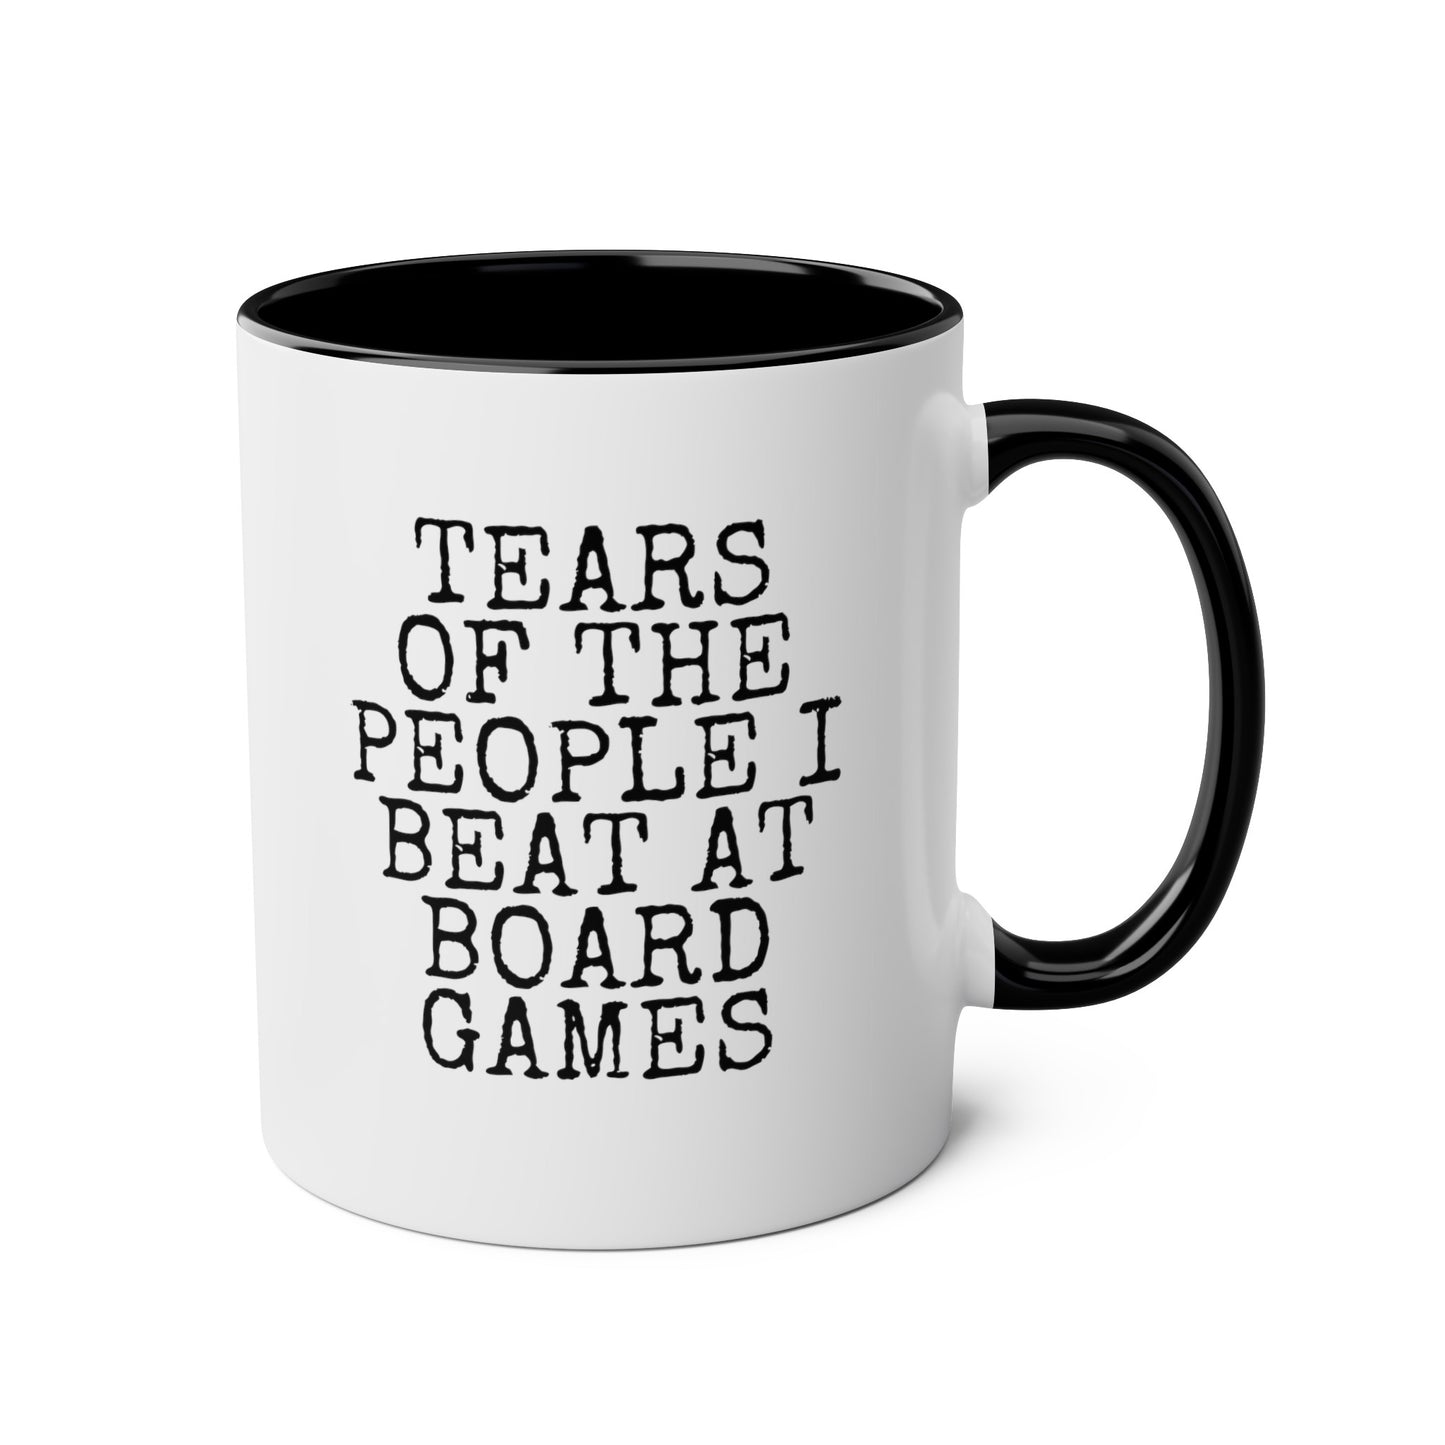 Tears Of The People I Beat At Board Games 11oz white with black accent funny large coffee mug gift for friends player him her quote waveywares wavey wares wavywares wavy wares